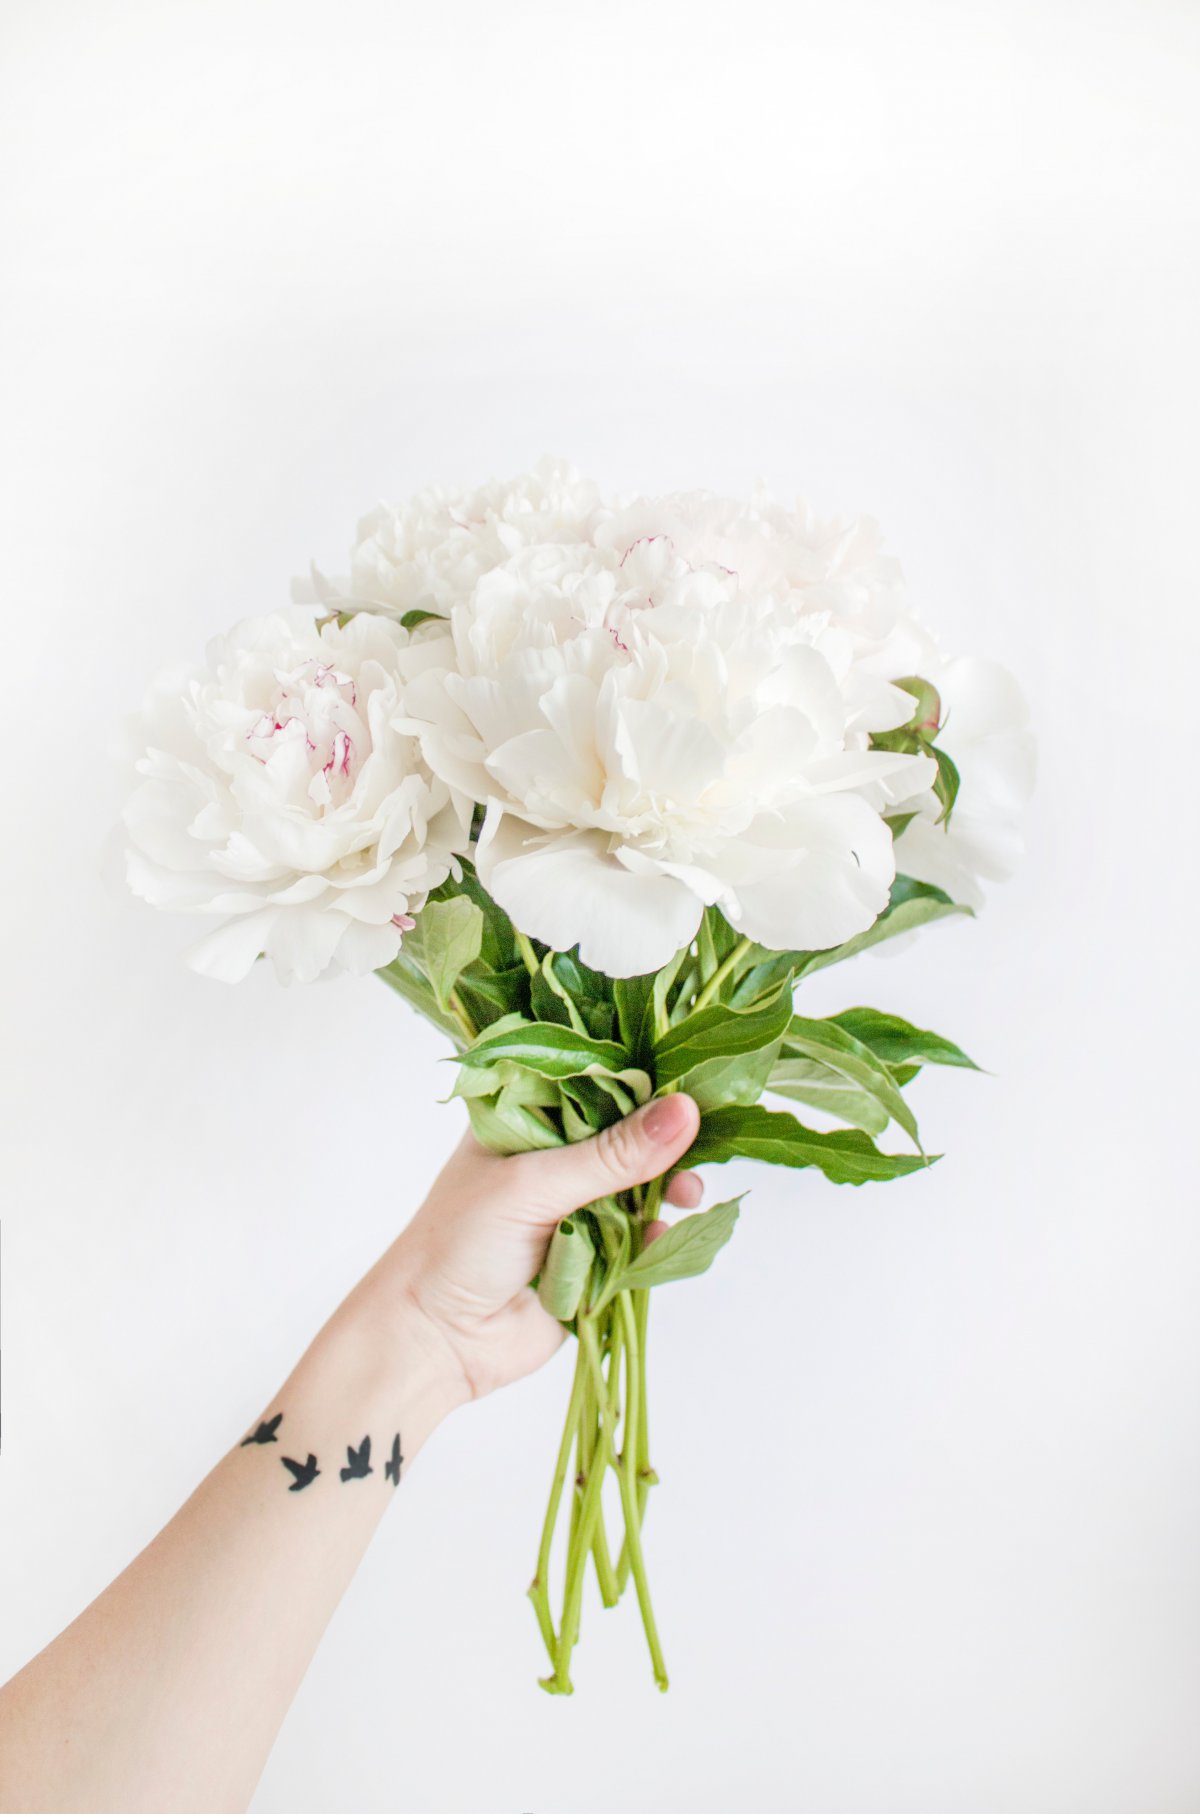 Pictures of holding flowers in hands